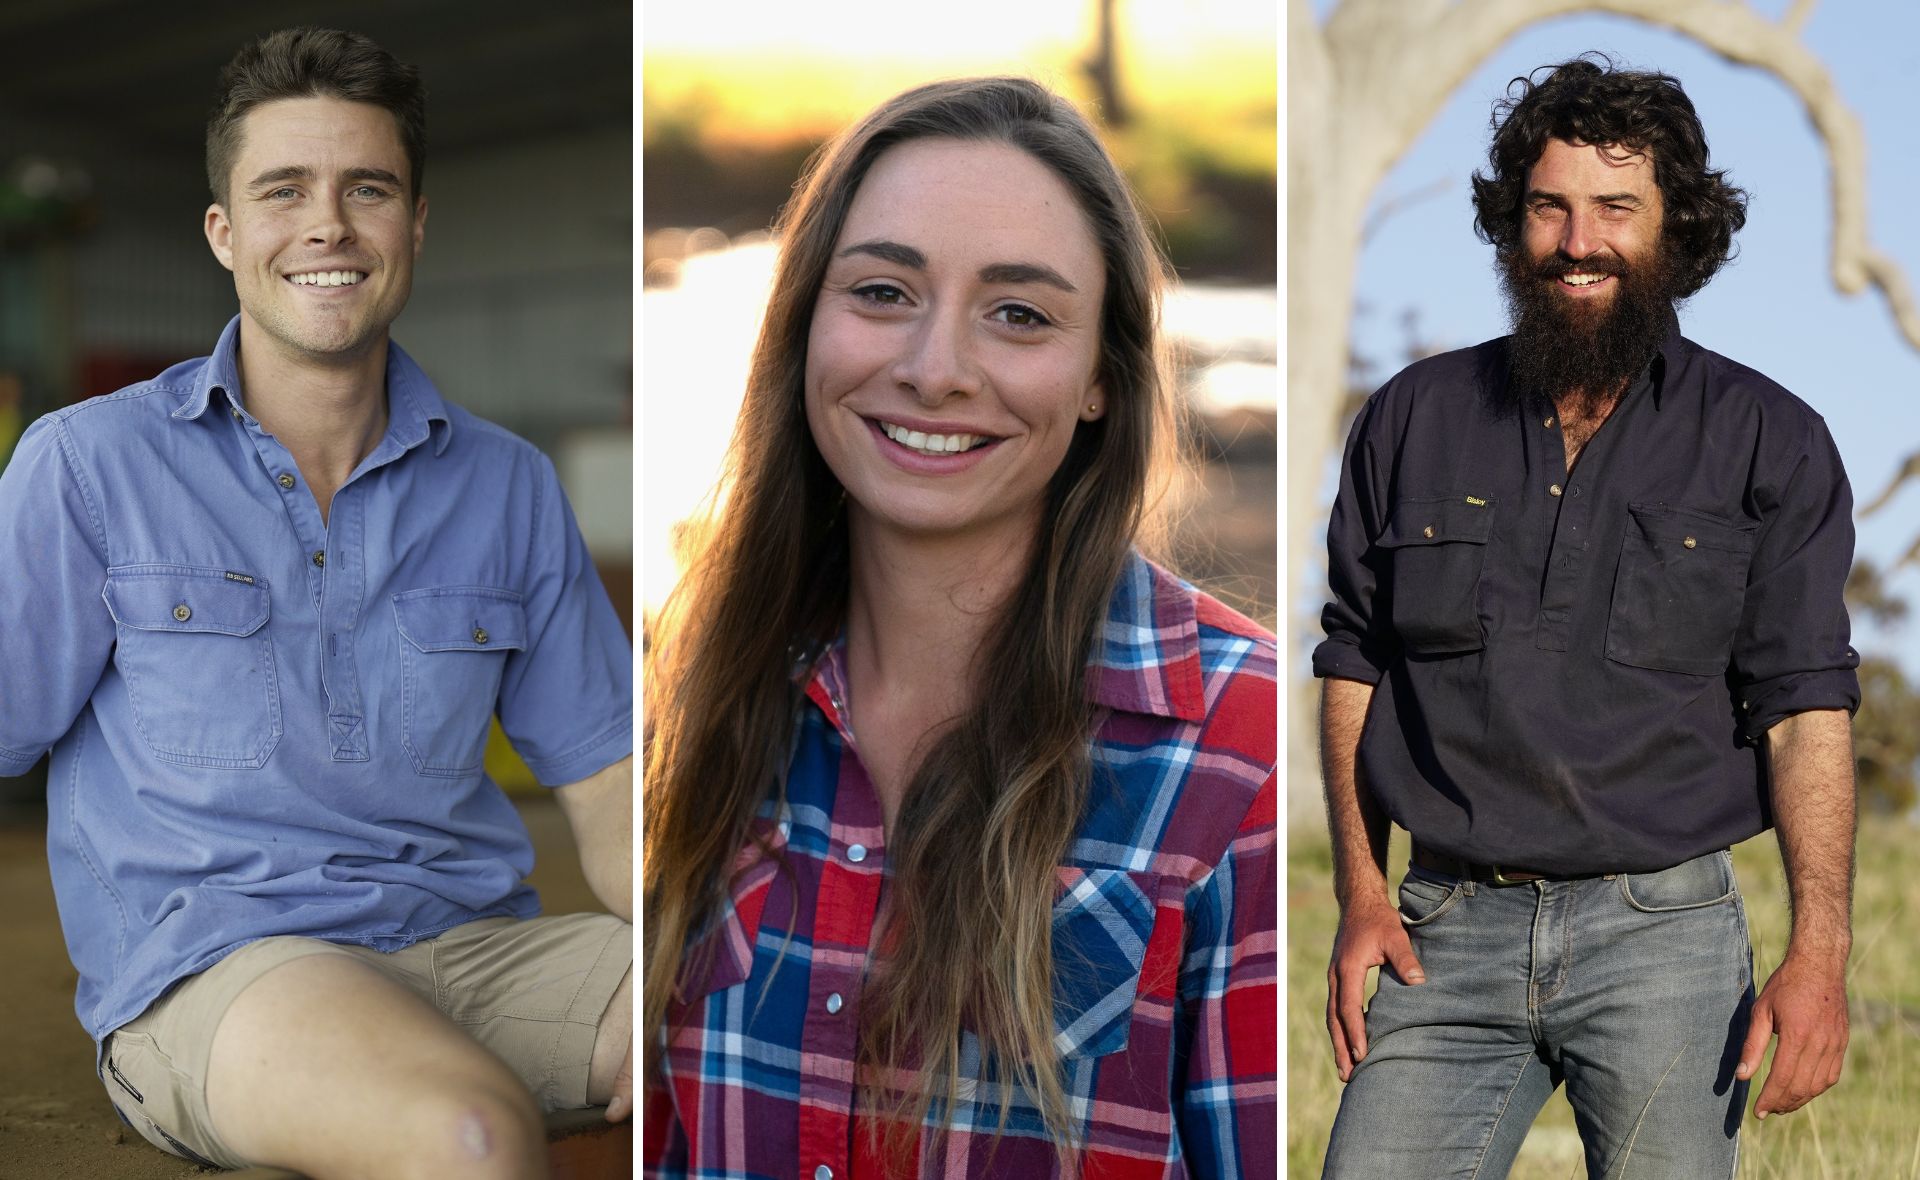 EXCLUSIVE: Meet the five hopefuls looking for love in the 2022 season of farmer wants a wife